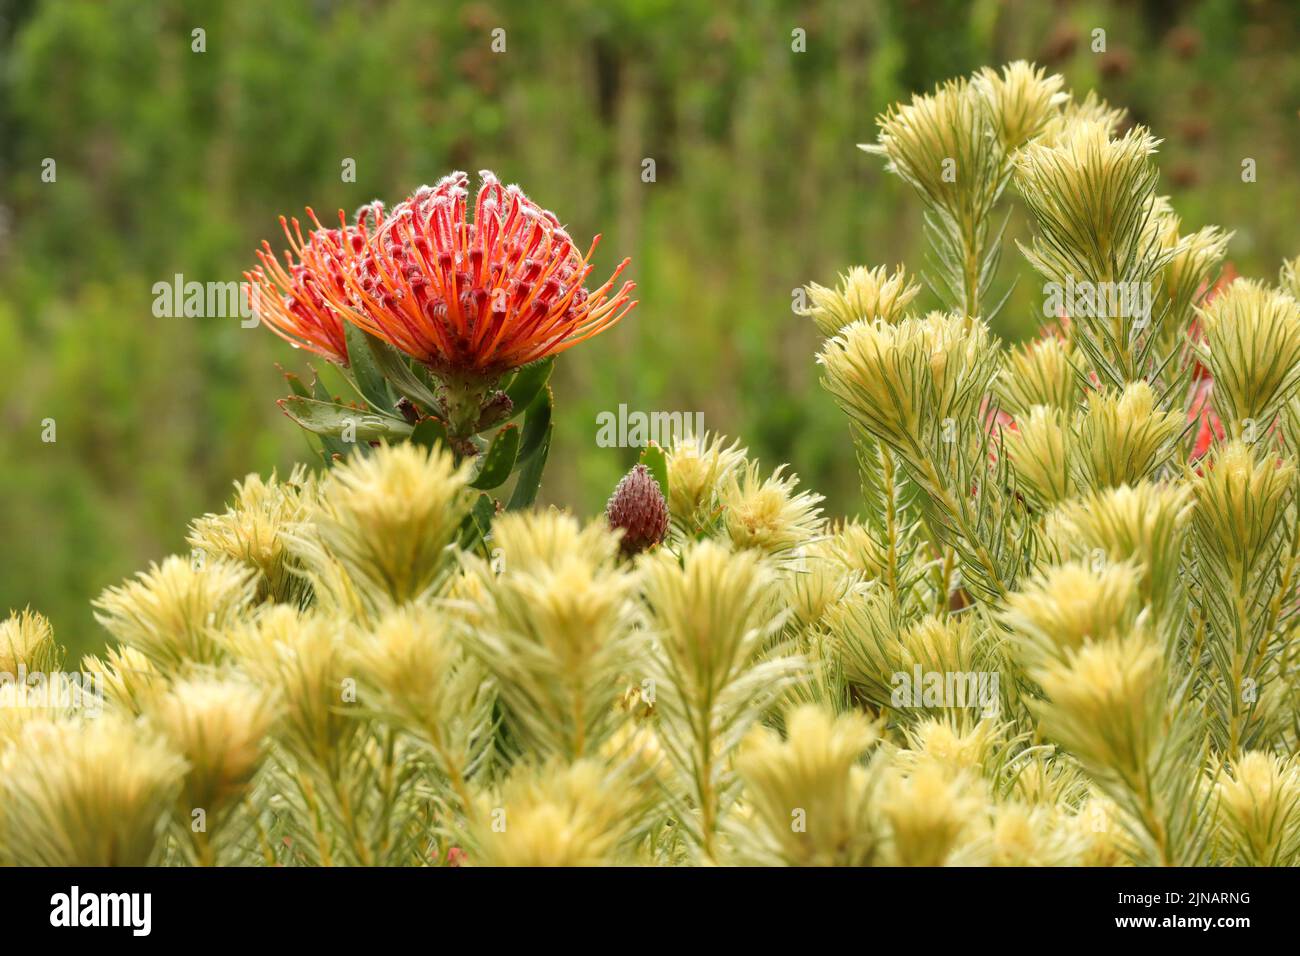 Pincushion Proteas in the Kirstenbosch Botanical Gardens in Cape Town South Africa Stock Photo